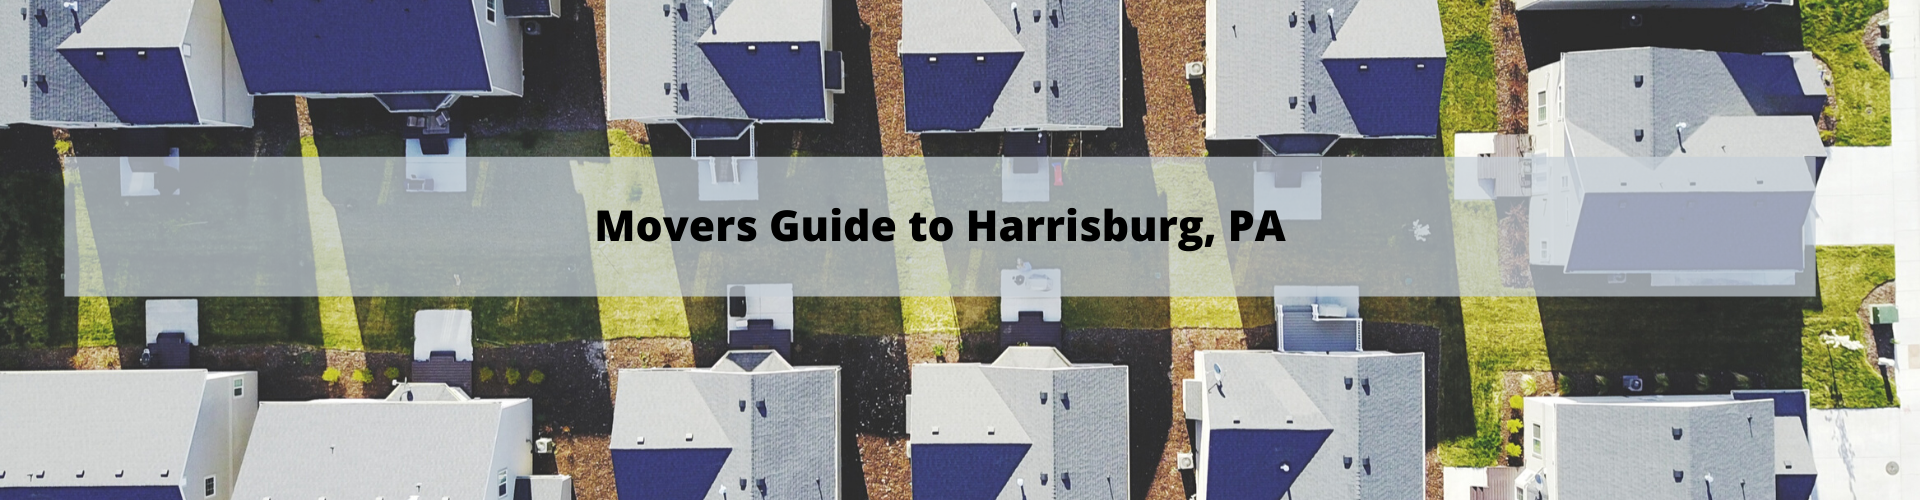 Movers Guide to Harrisburg PA